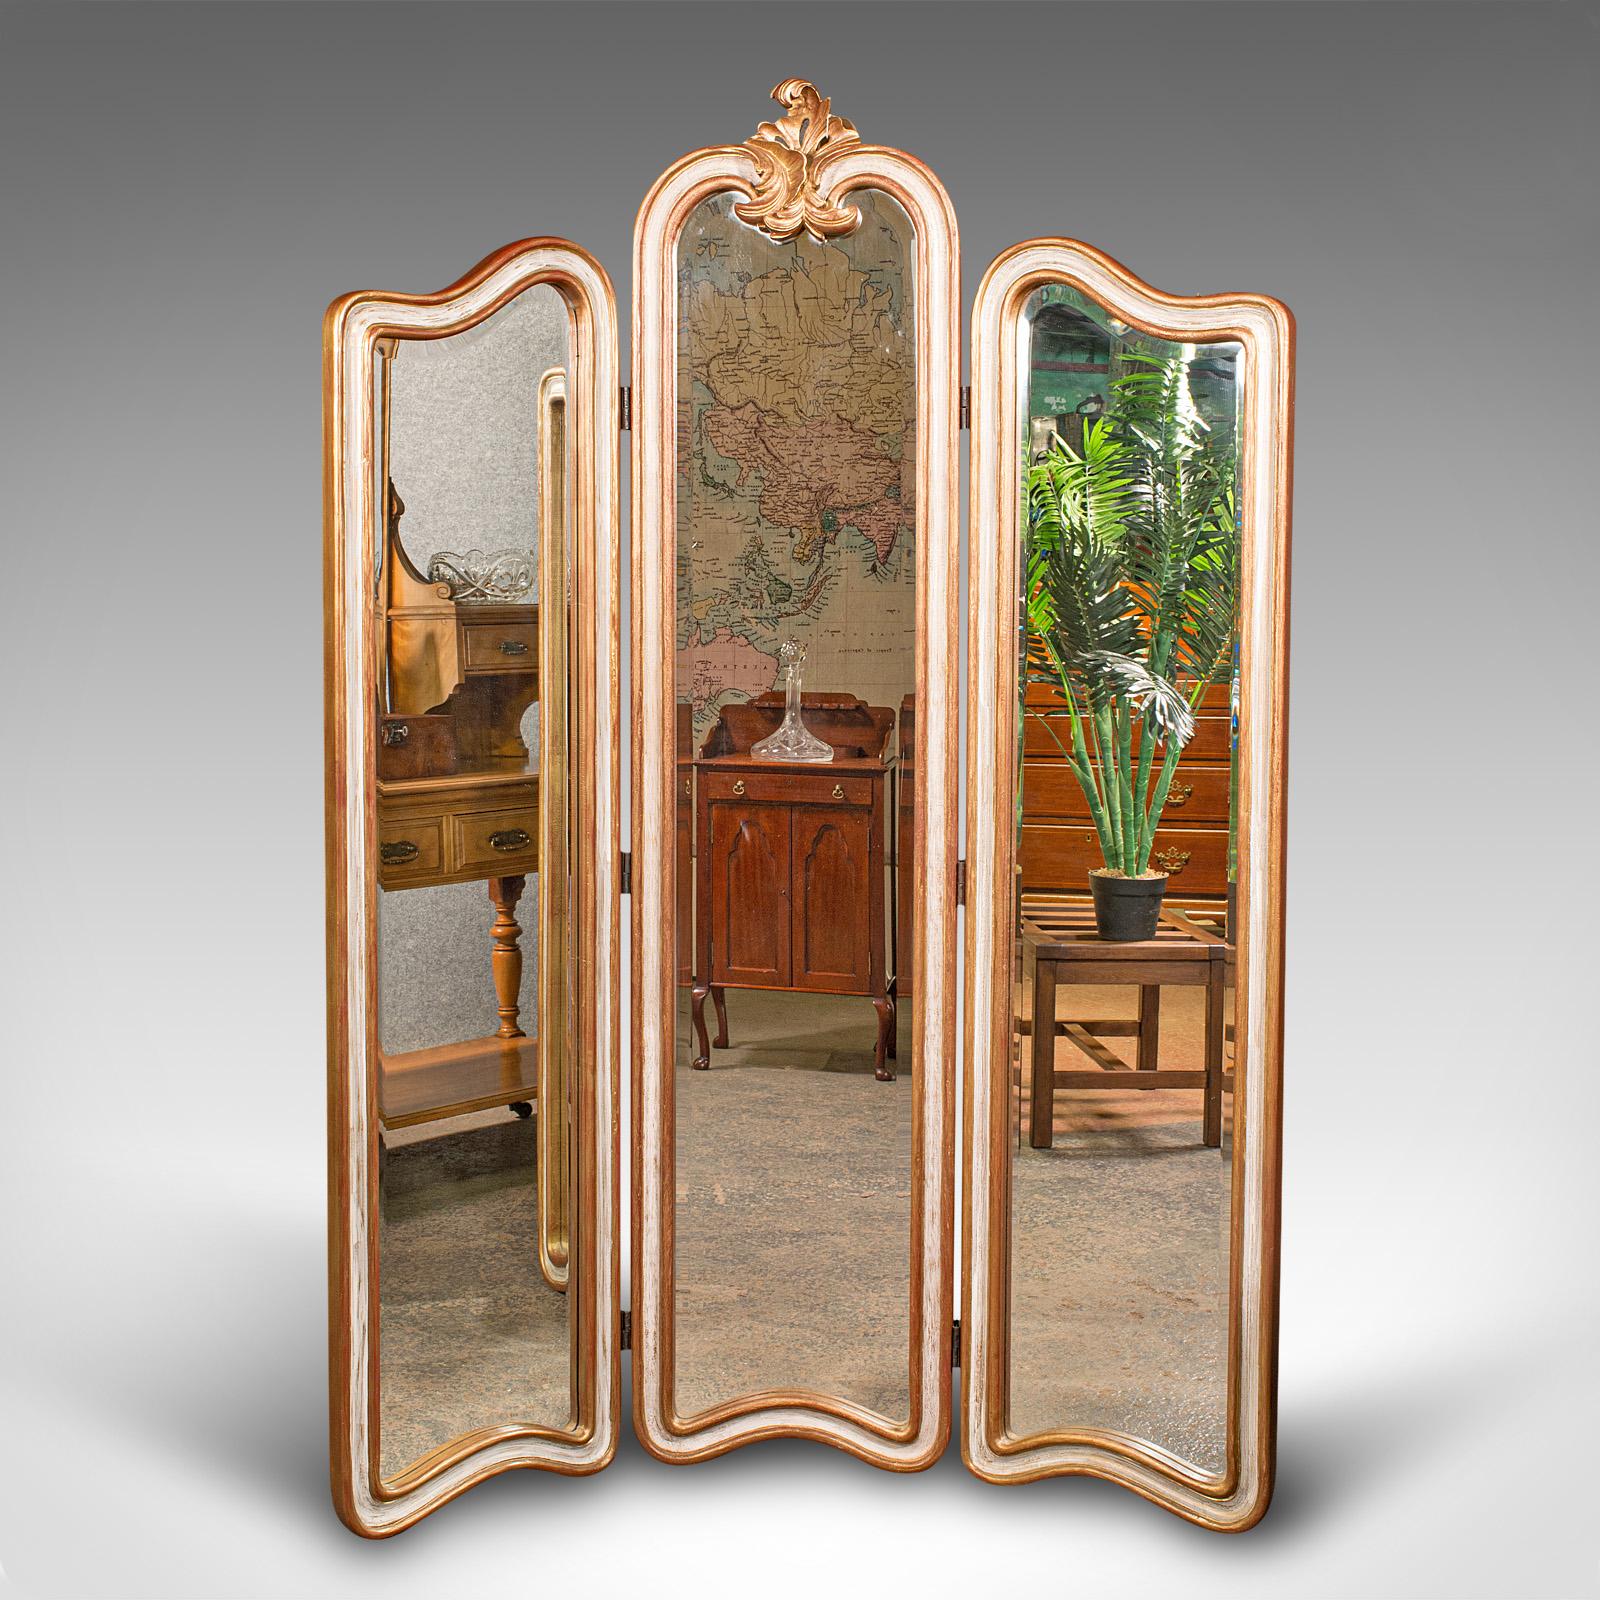 This is a vintage dressing mirror. A Continental, gilt resin 3-panel divider or privacy screen, dating to the late 20th century, circa 1970.

Striking in appearance, with superb mirrors and Italianate detail
Displaying a desirable aged patina